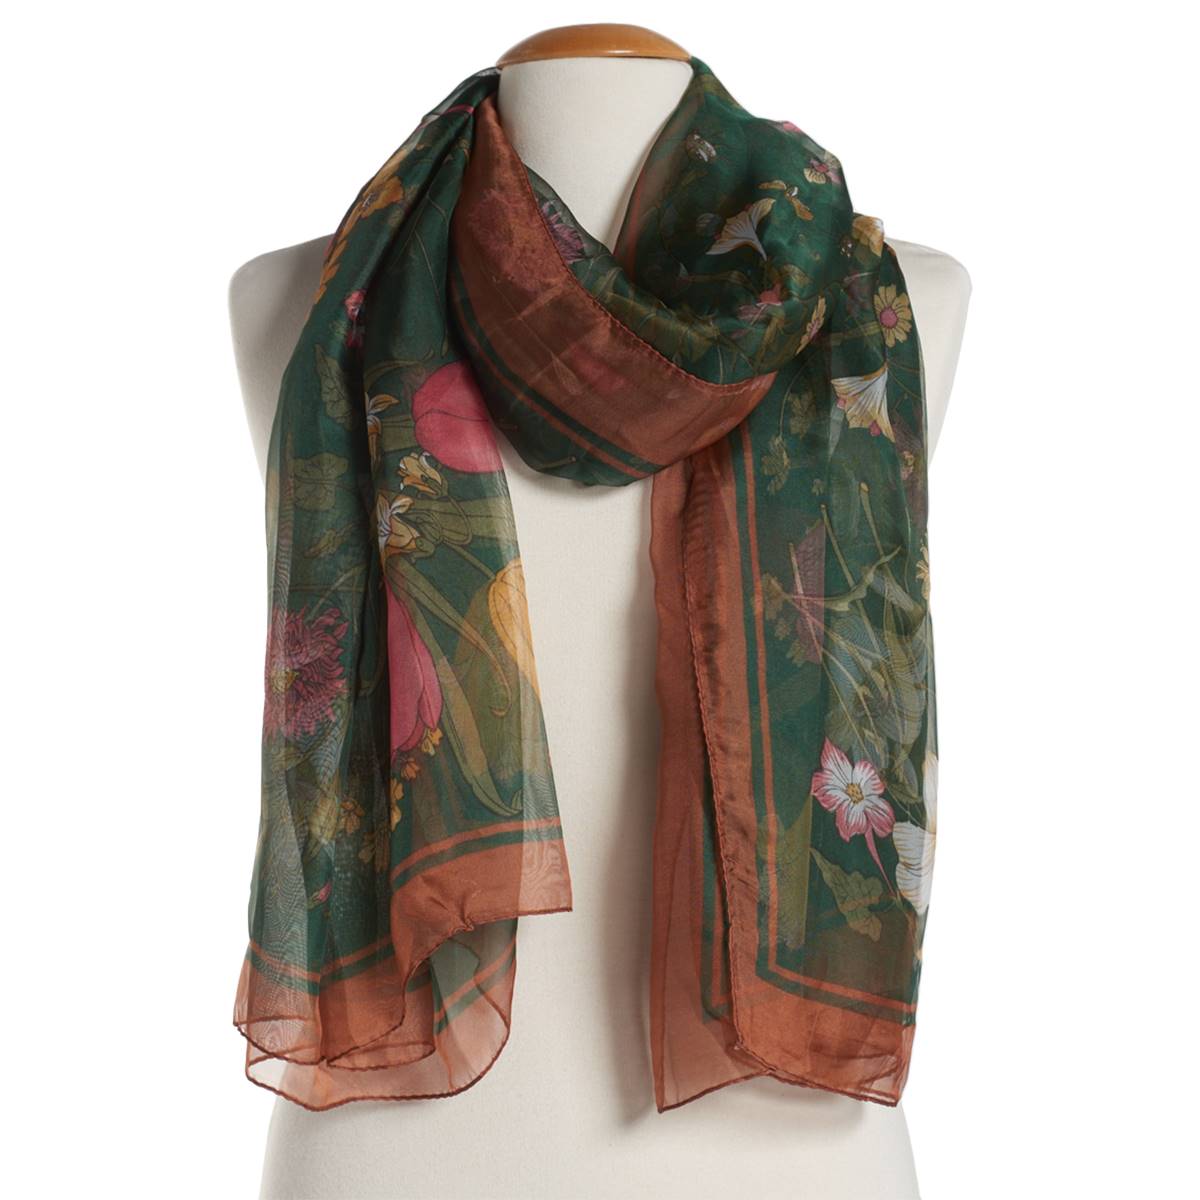 Womens Renshun Floral w/Solid Border Oblong Scarf